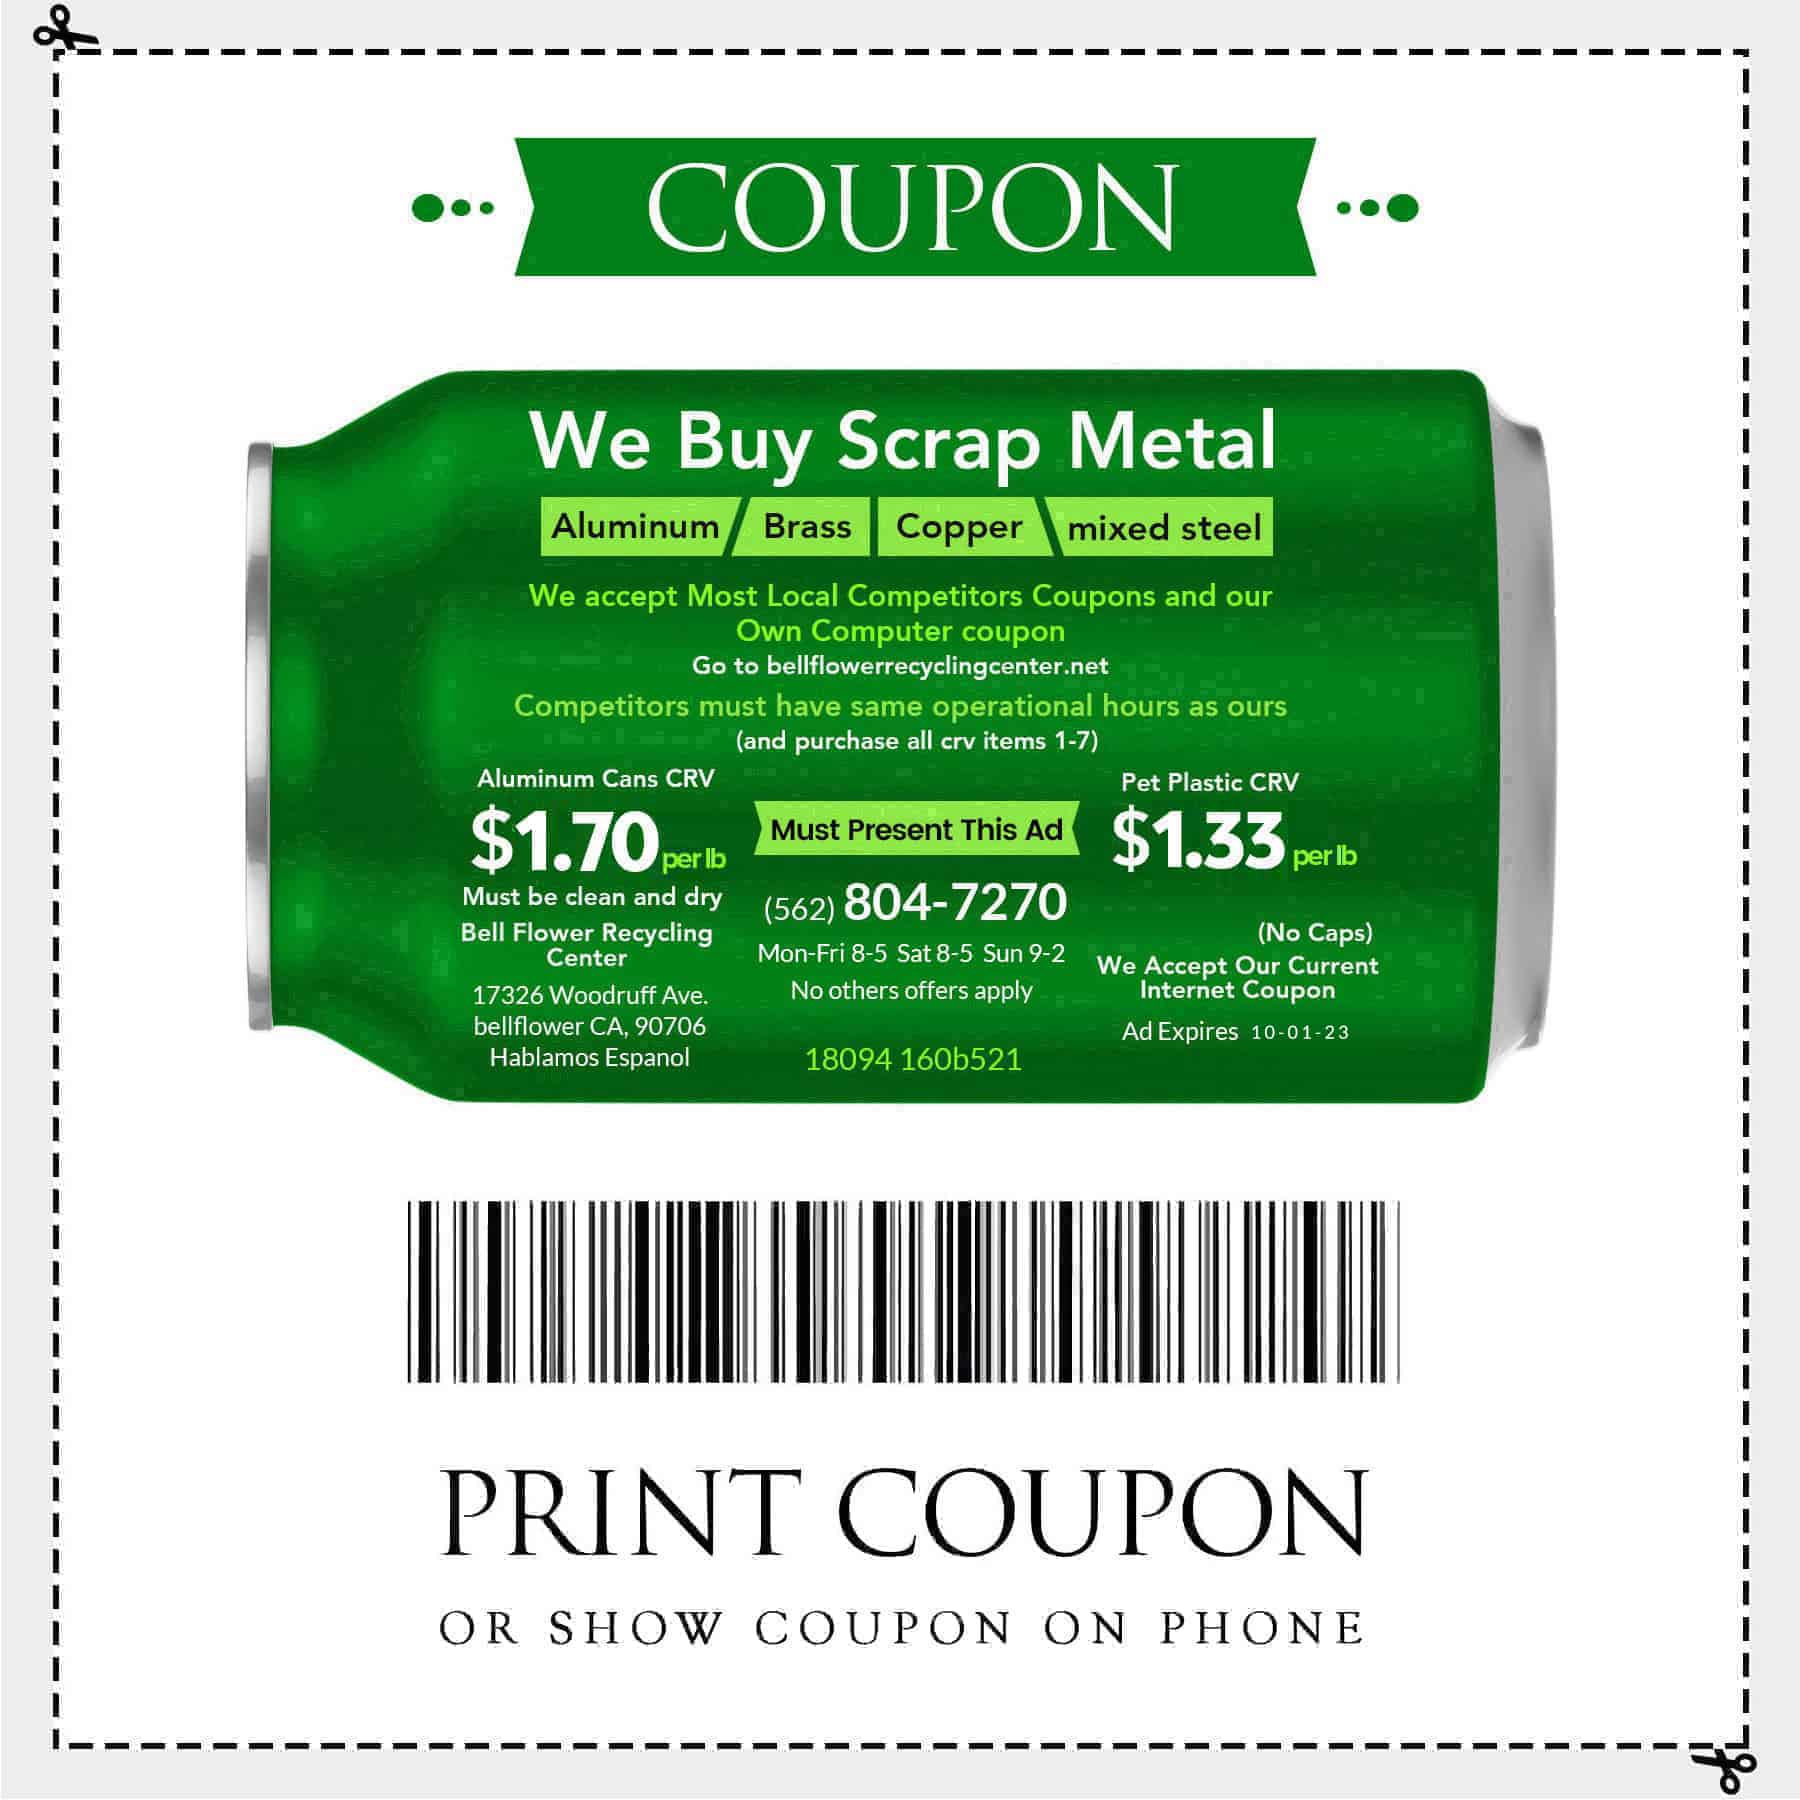 We buy scrap metal Aluminum, Brass, Copper, Mixed steel. We accept most local competitors coupons and our own computer coupon. Competitors must have same operational hours as ours (and purchase all crv items 1-7). One Must present this add. Aluminum Cans CRV $1.70 per lb and Pet Plastic CRV $1.33 per lb.